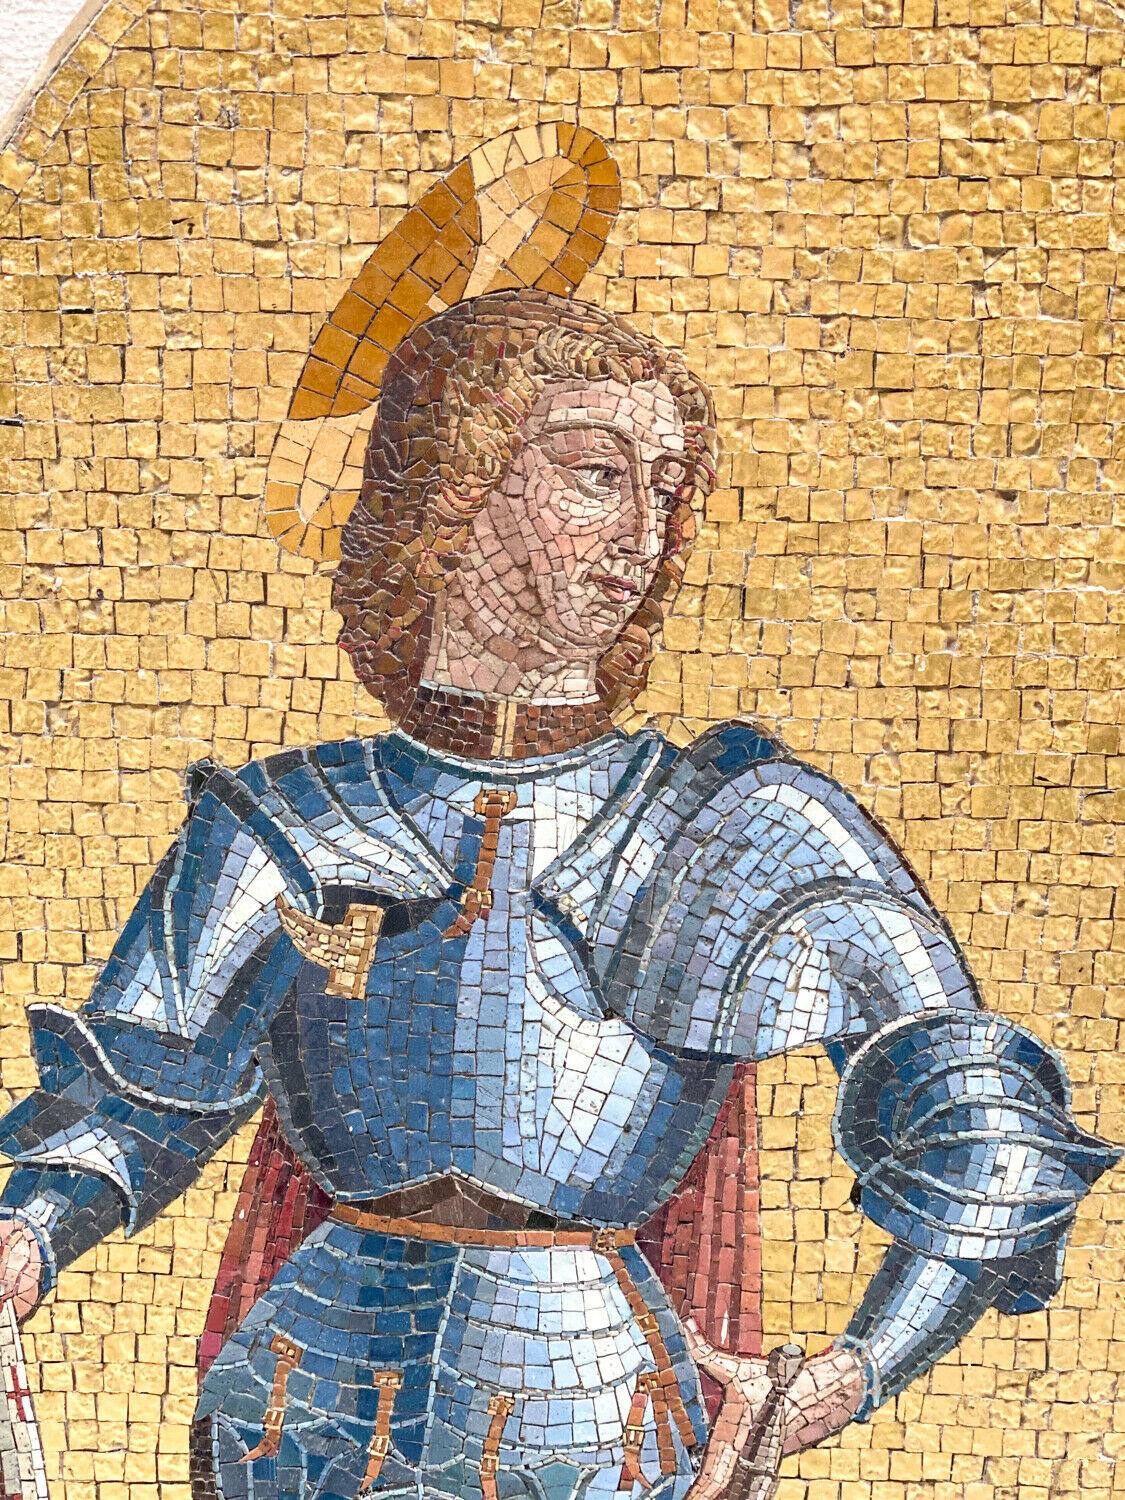 An incredible Italian gold tesserae glass mosaic depicting Saint Michael Slaying the Dragon. The background consisting of gold smalti tassarae mosaic tiles, various colored tiles used to expertly depict the archangel Michael and the dragon laying at